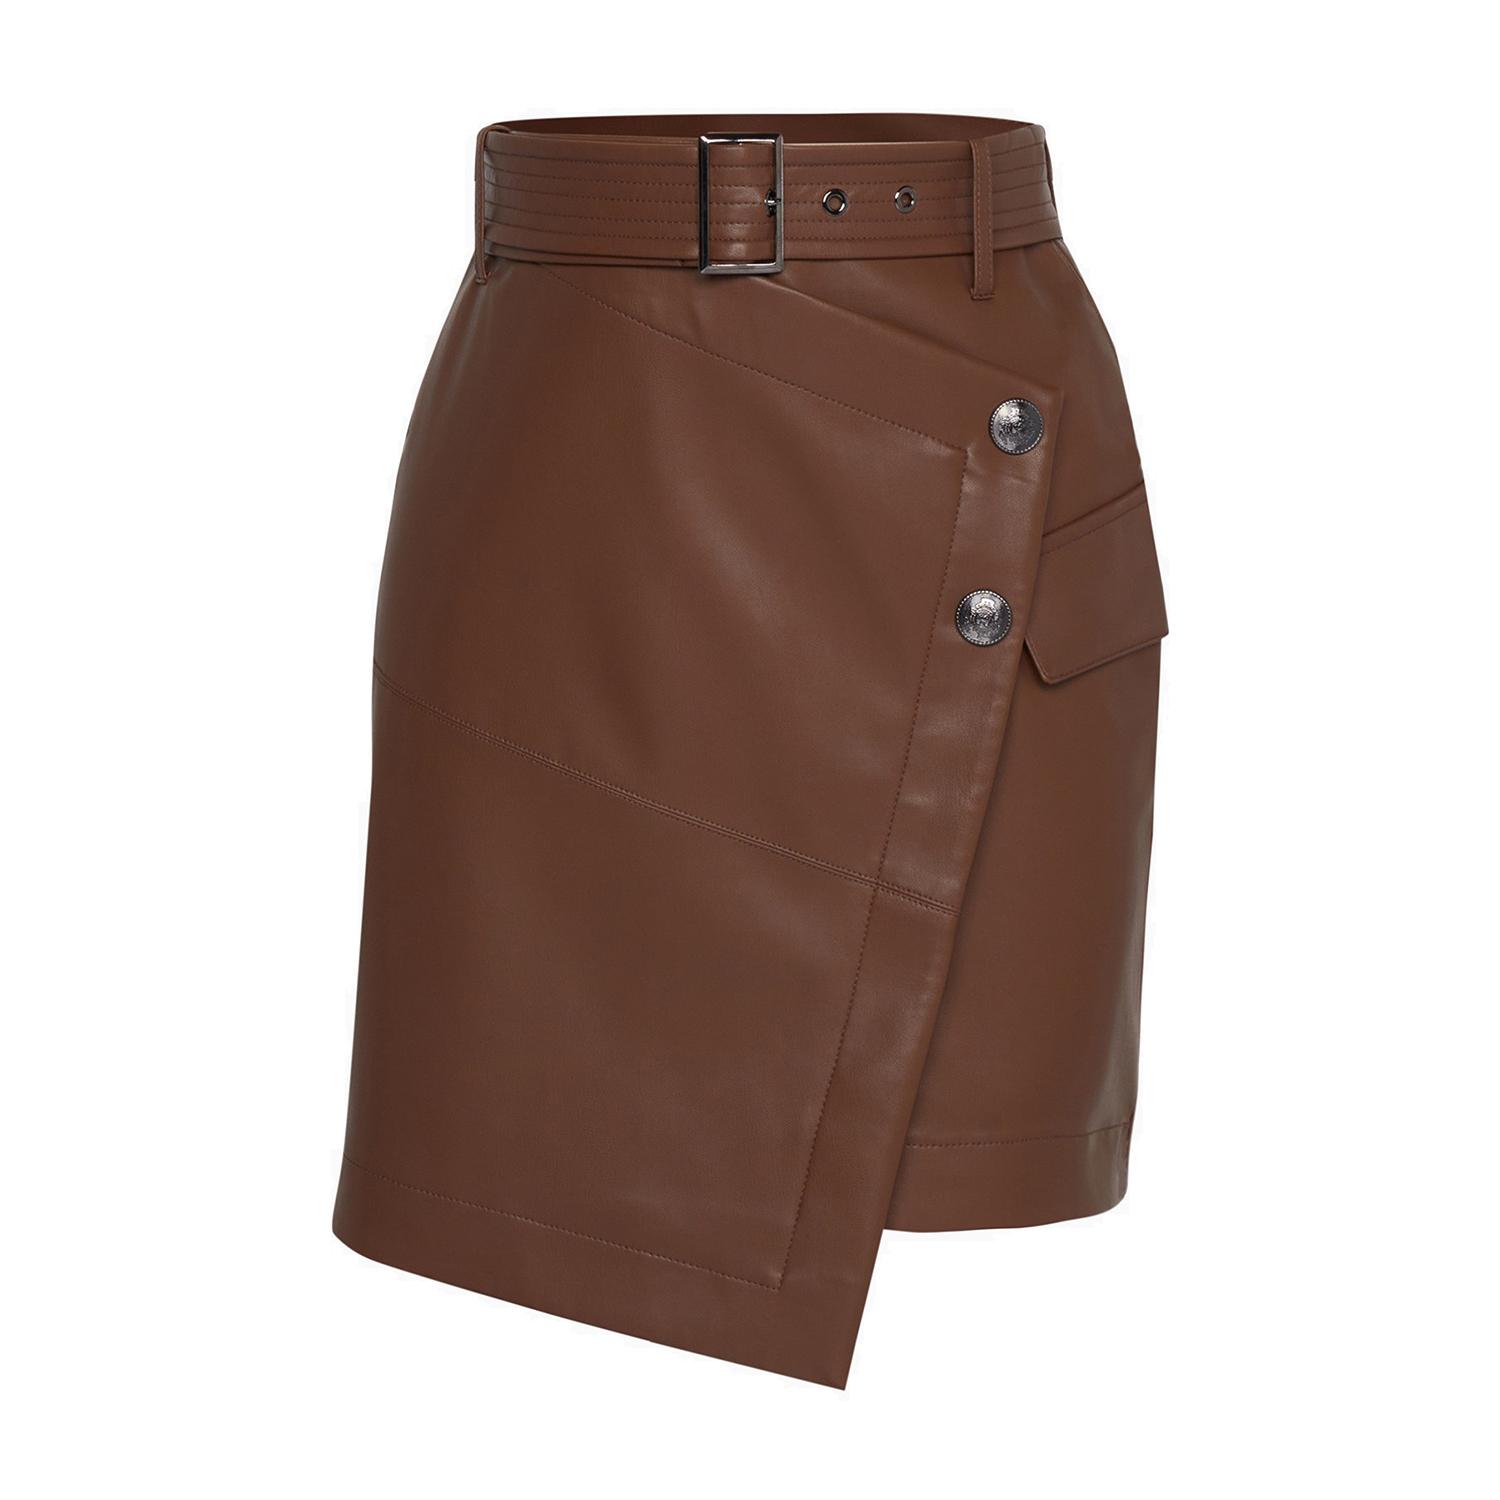 Women’s Asymmetric Cut Belted Brown Faux Leather Skirt Small Rue Les Createurs